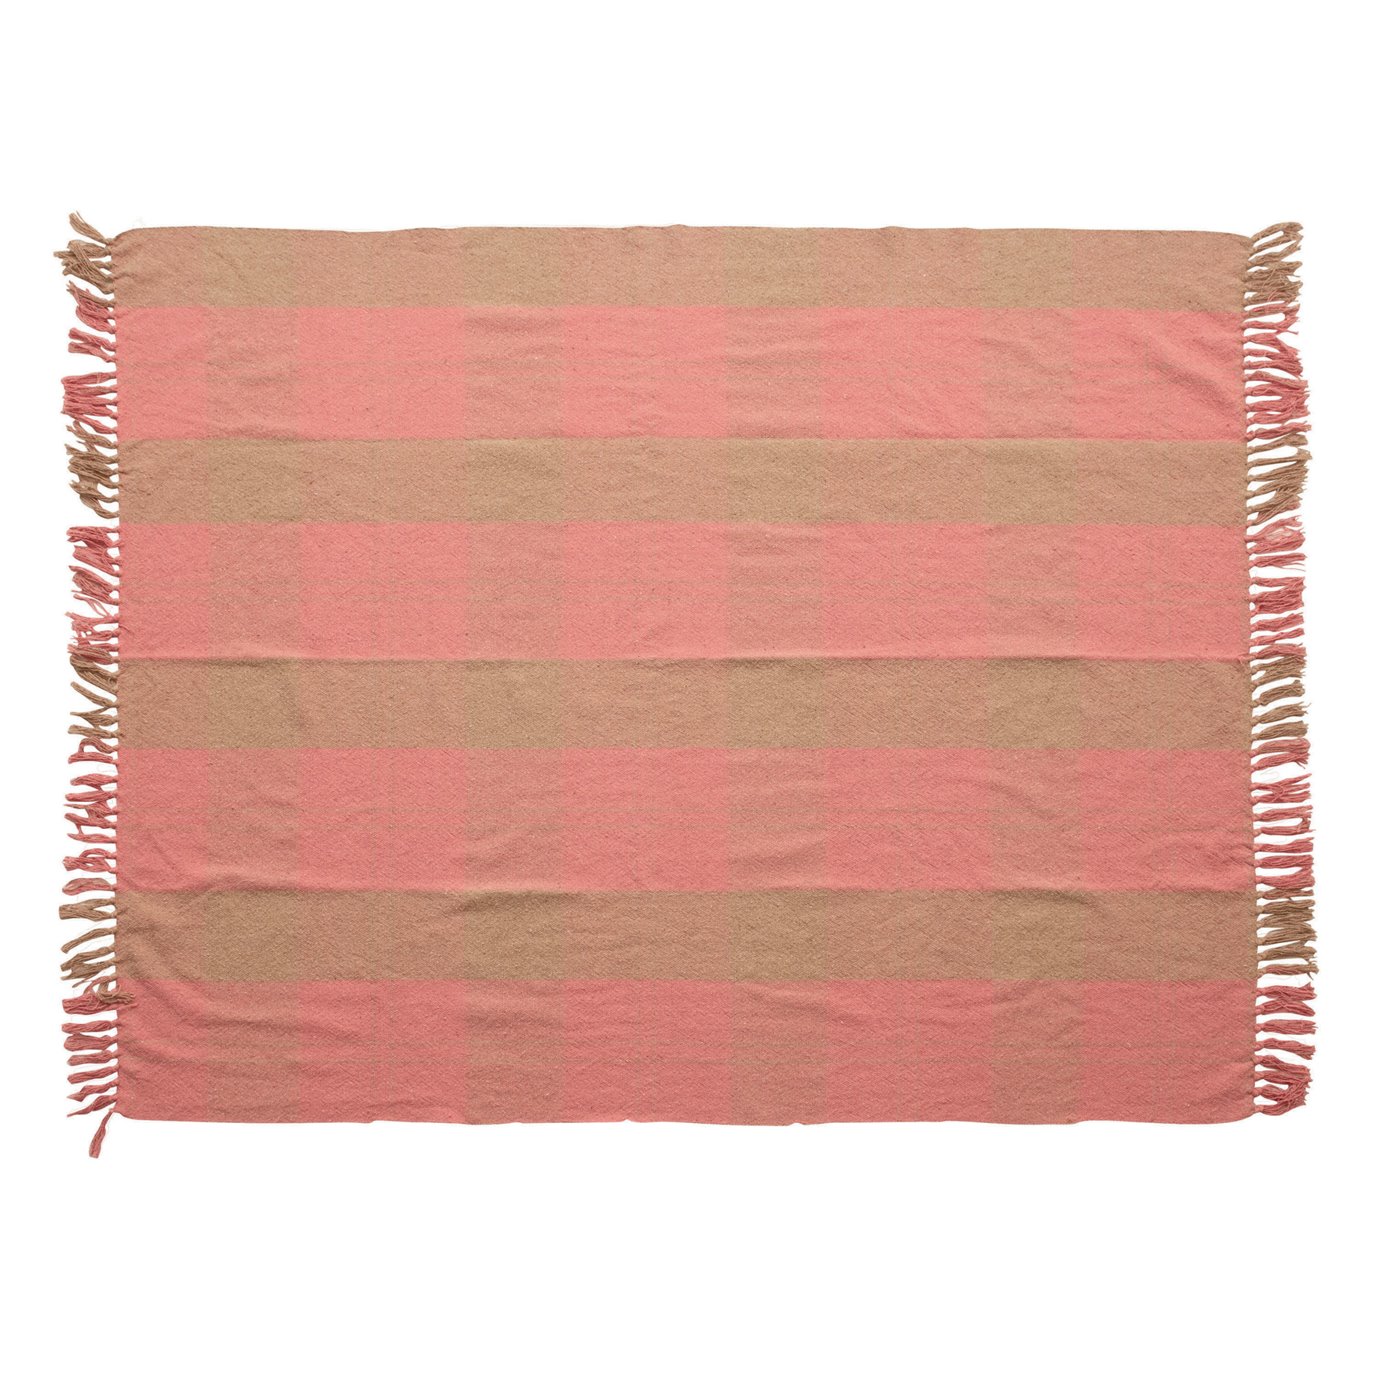 Woven Recycled Cotton Blend Plaid Throw, Pink & Tan Color